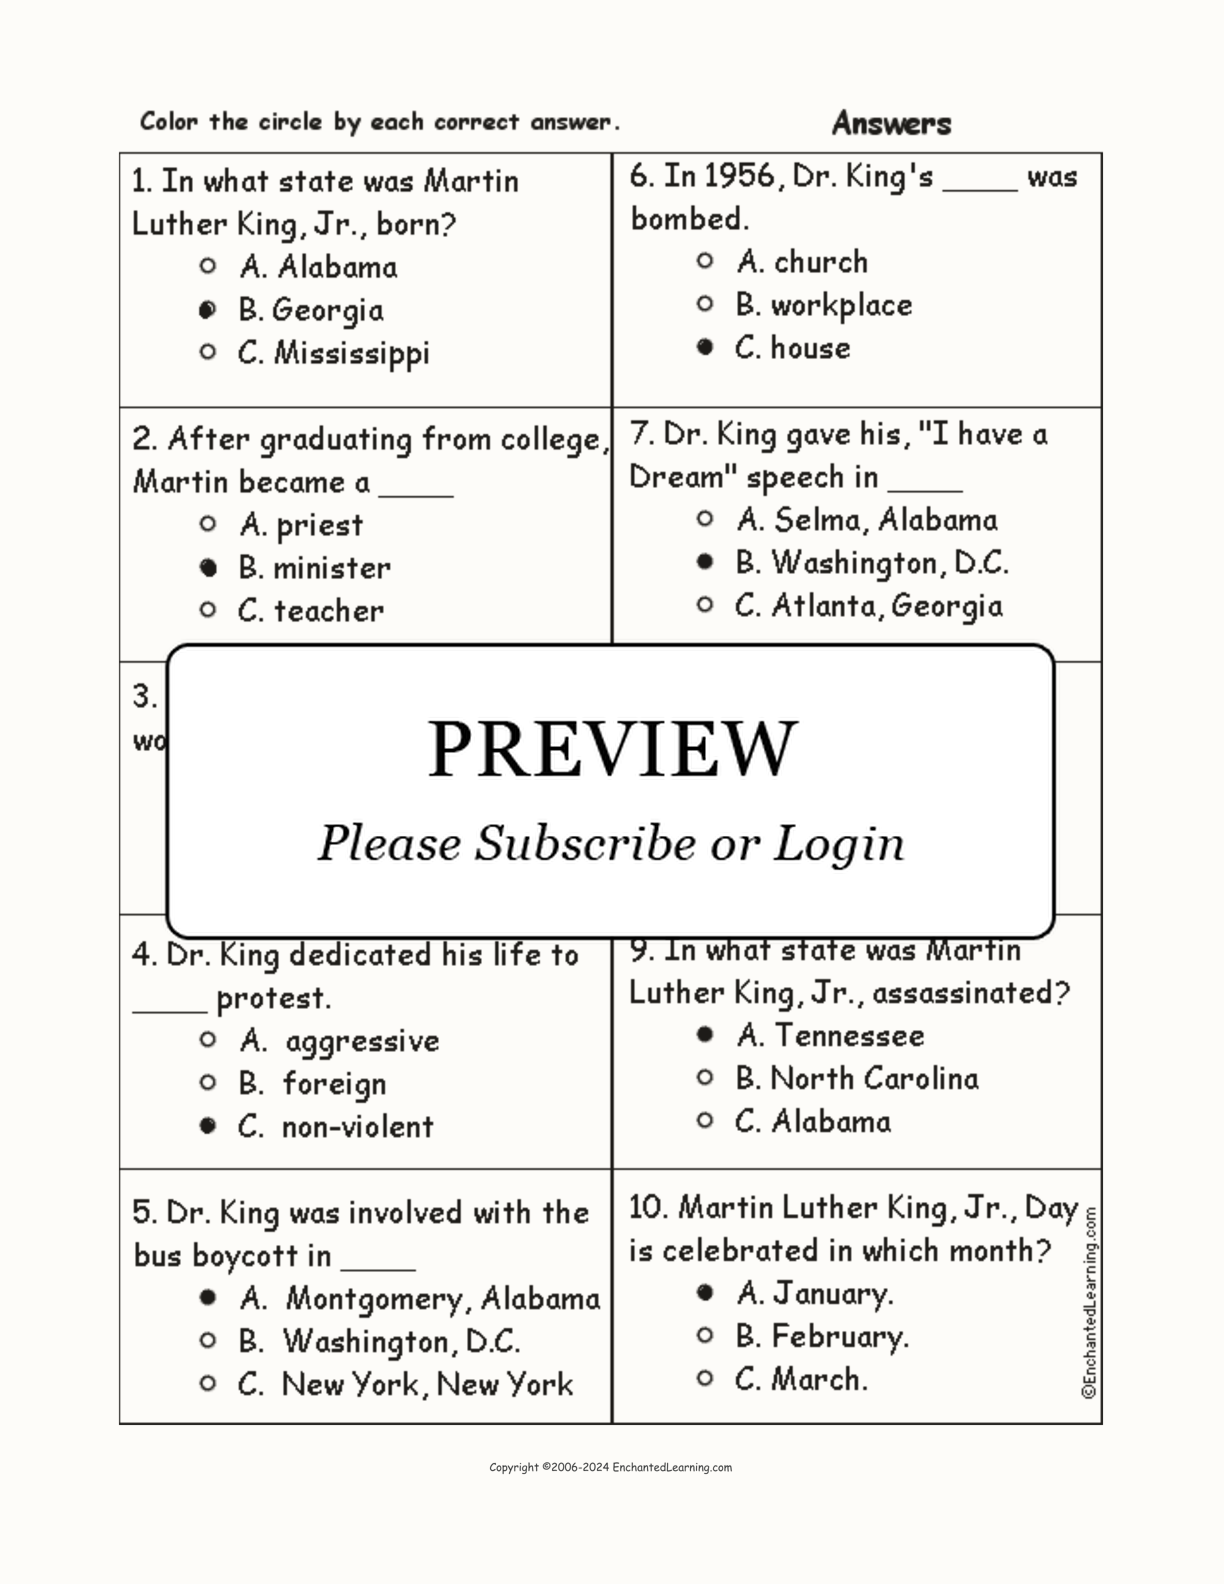 Martin Luther King, Jr., Quiz interactive worksheet page 2